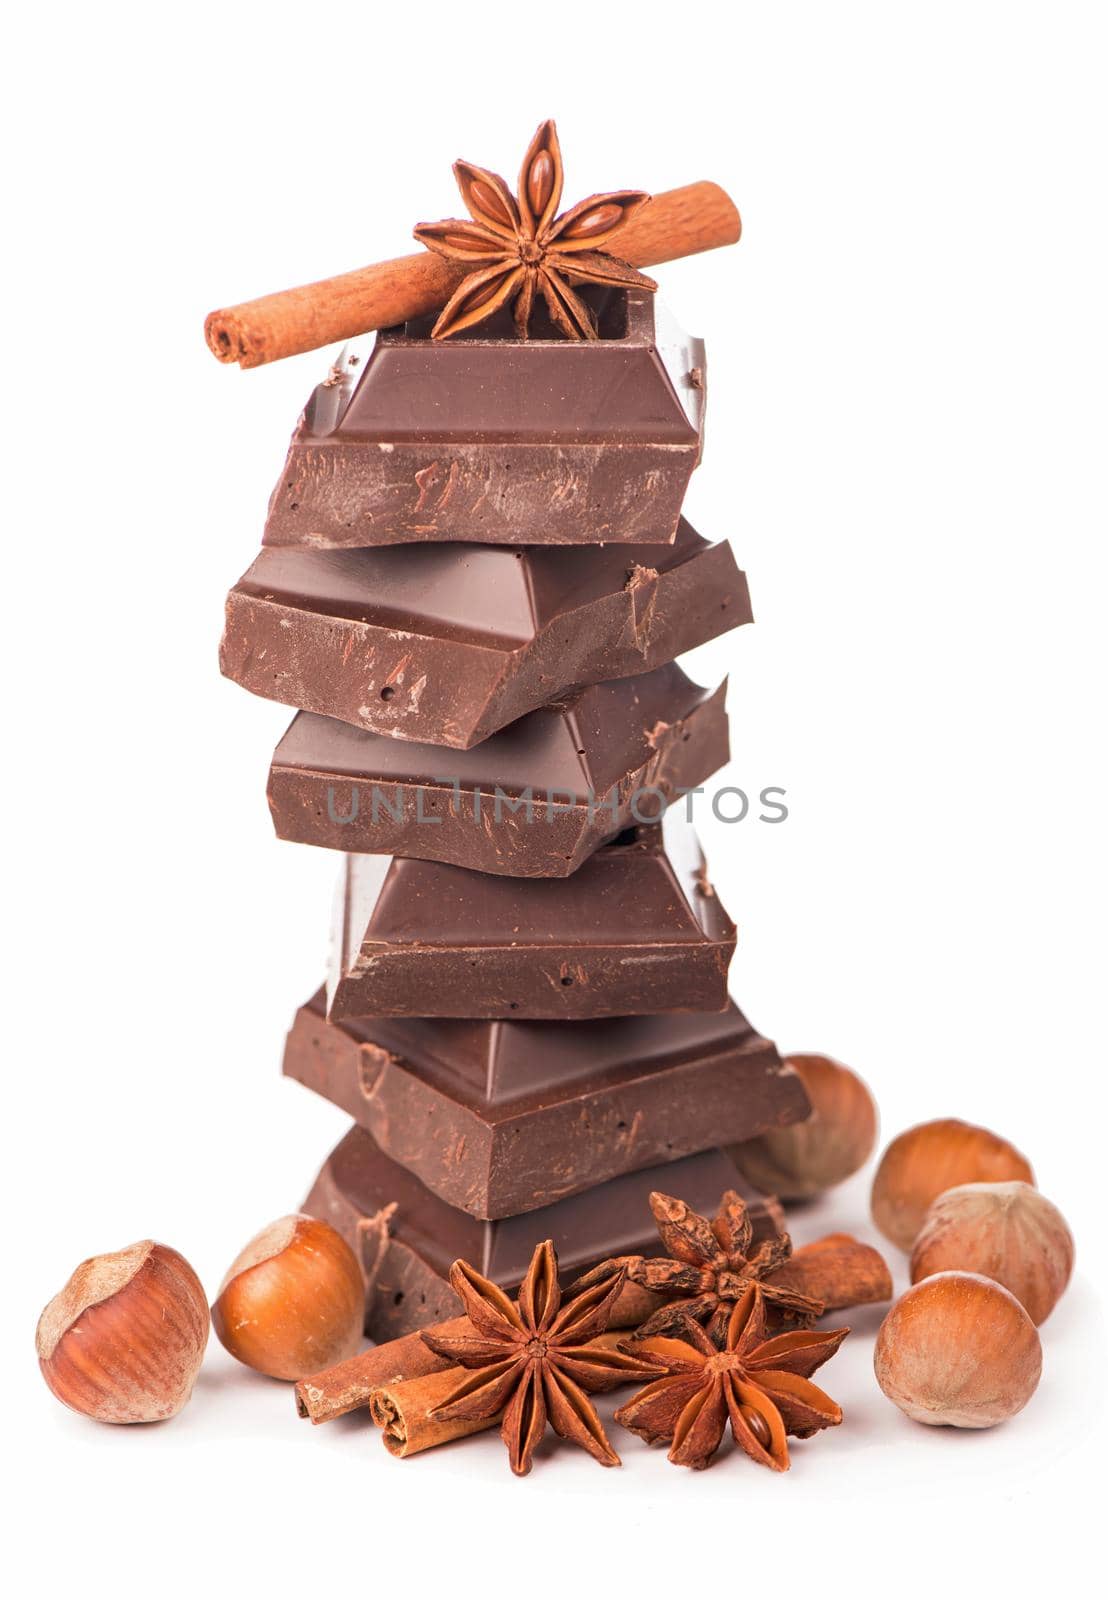 chocolate bars with nuts cinnamon anise and coffee on white background by aprilphoto